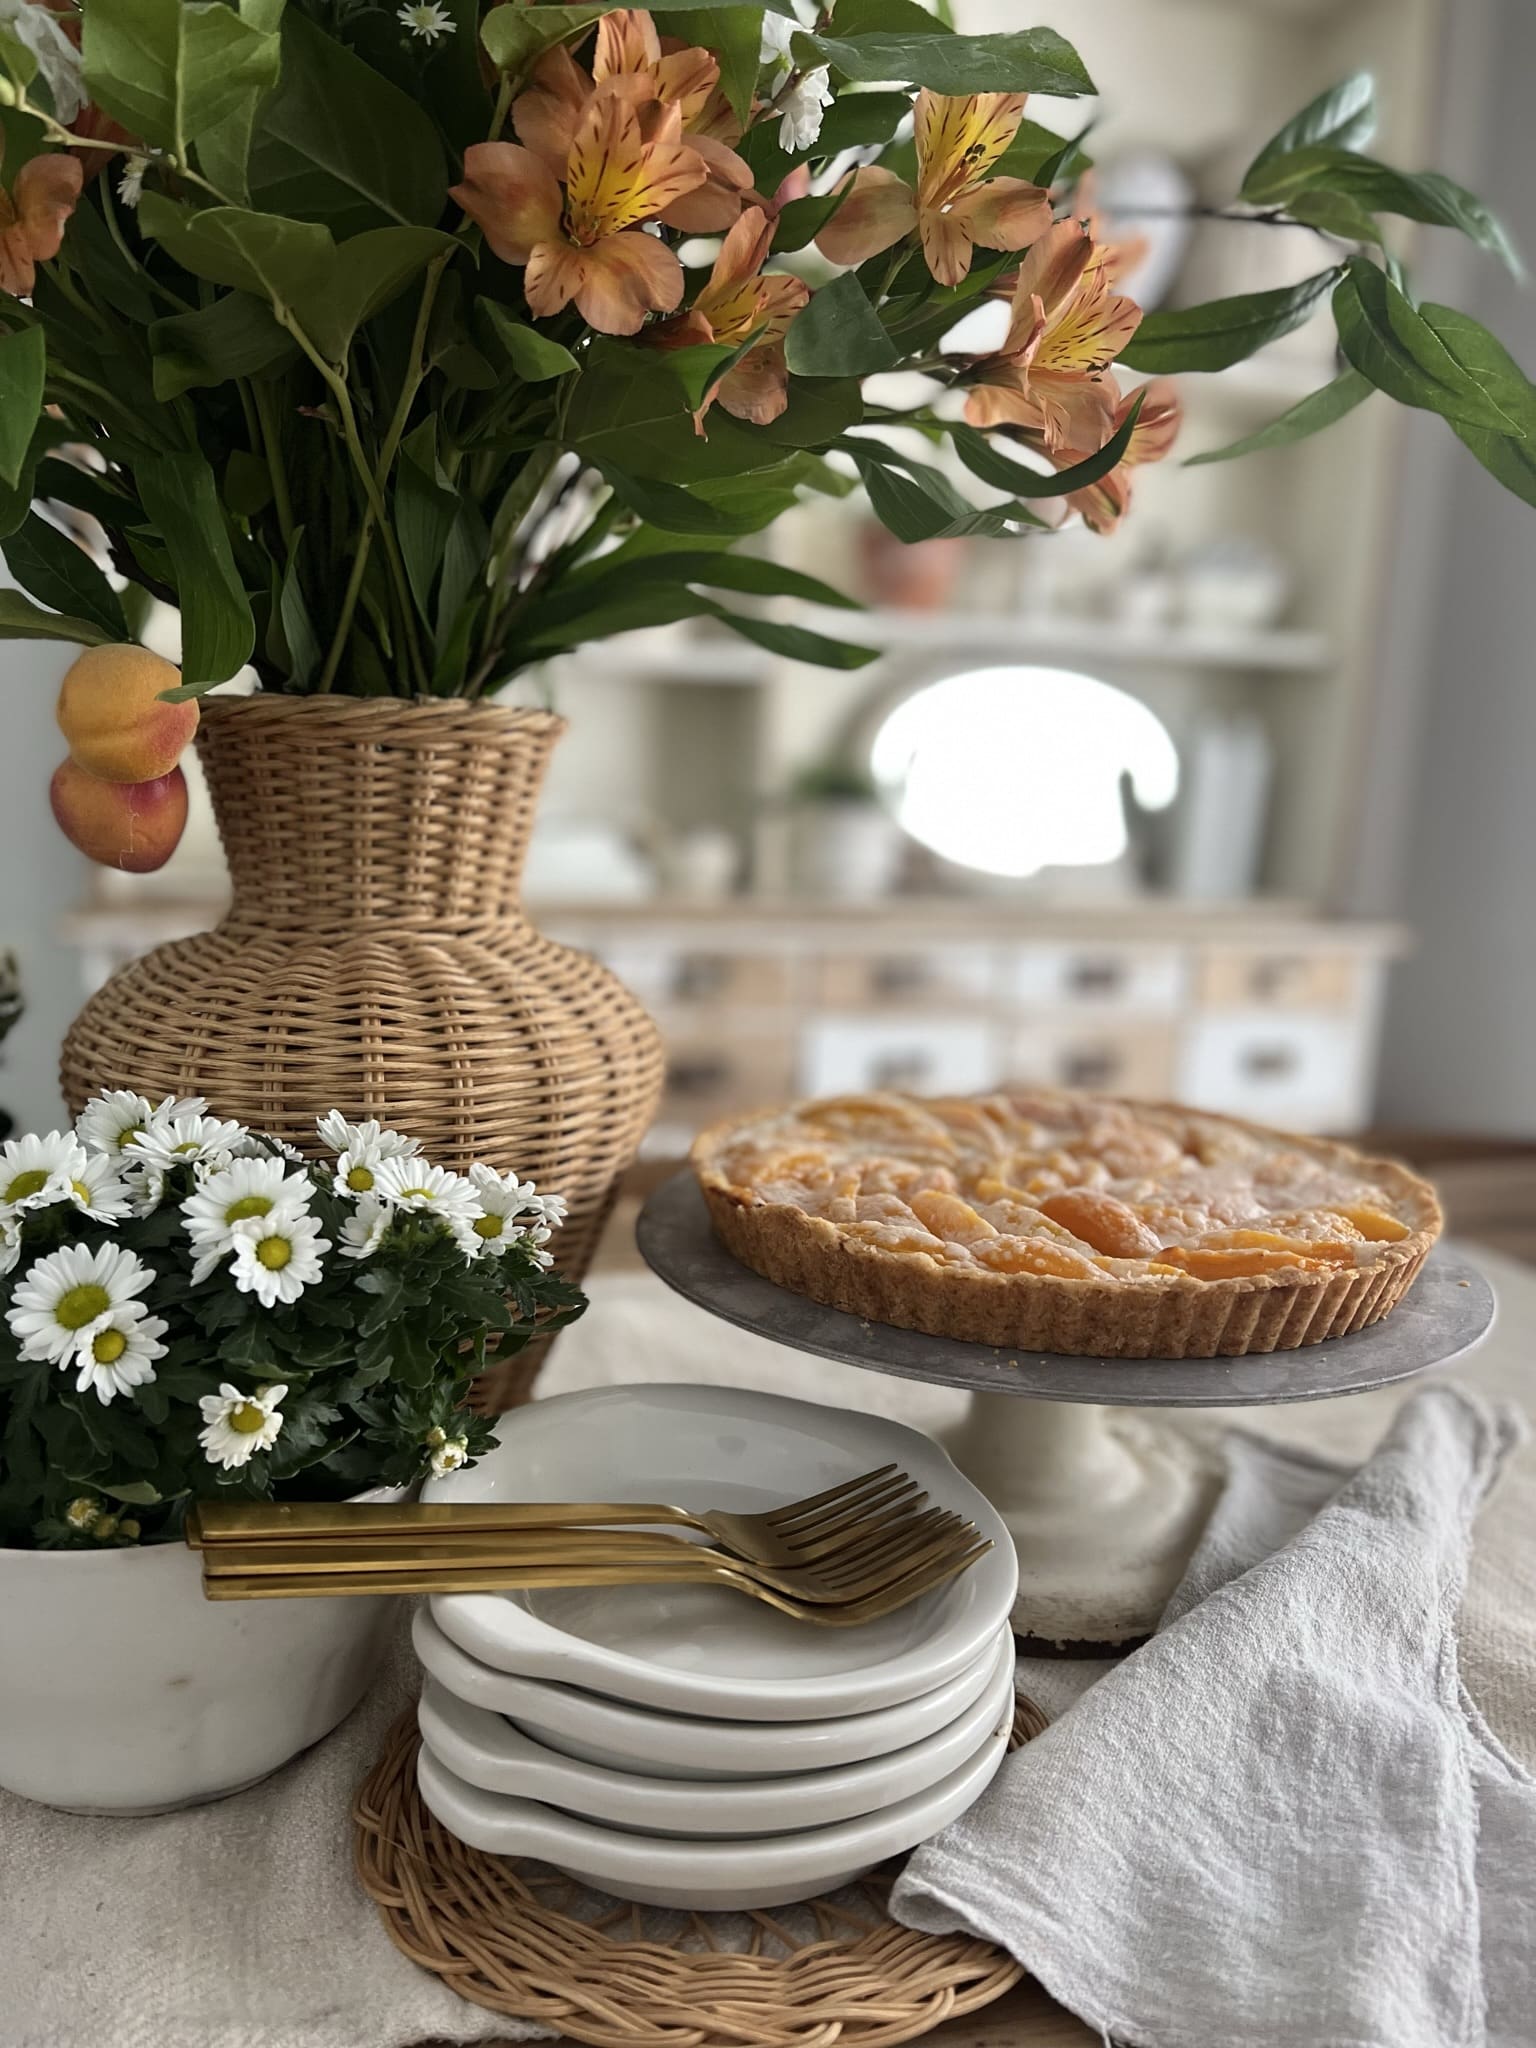 peach tart on a white cake stand with a small vase of white flowers beside it